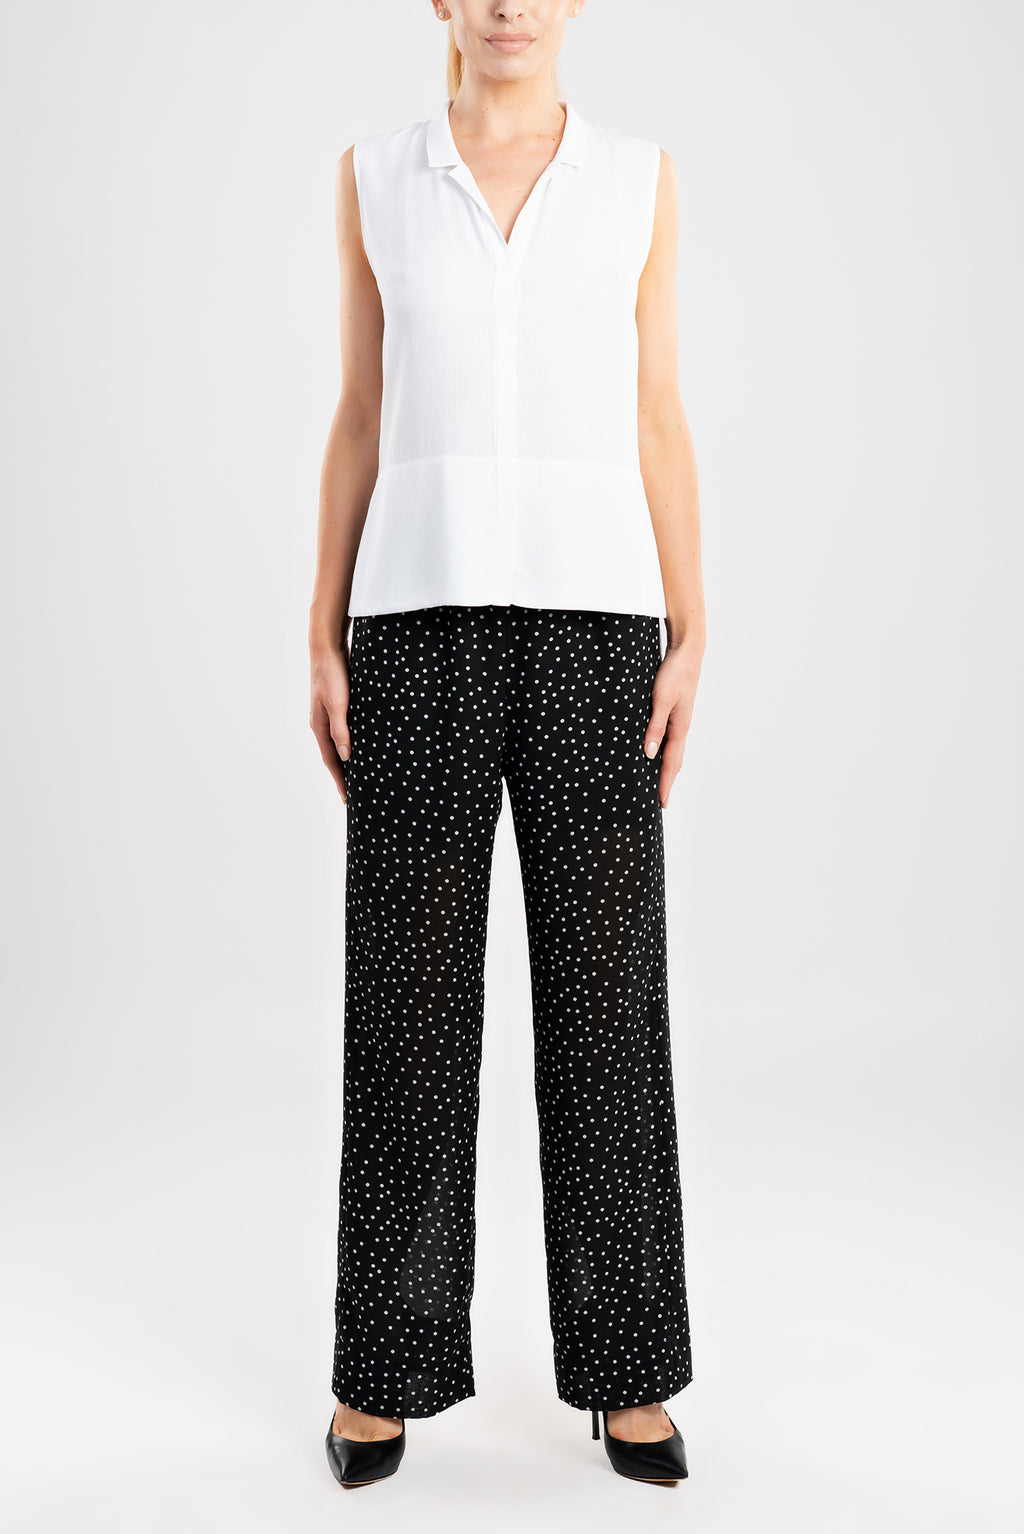 The wide-leg pants are tailored from a luxurious black fabric with white polka-dots. 